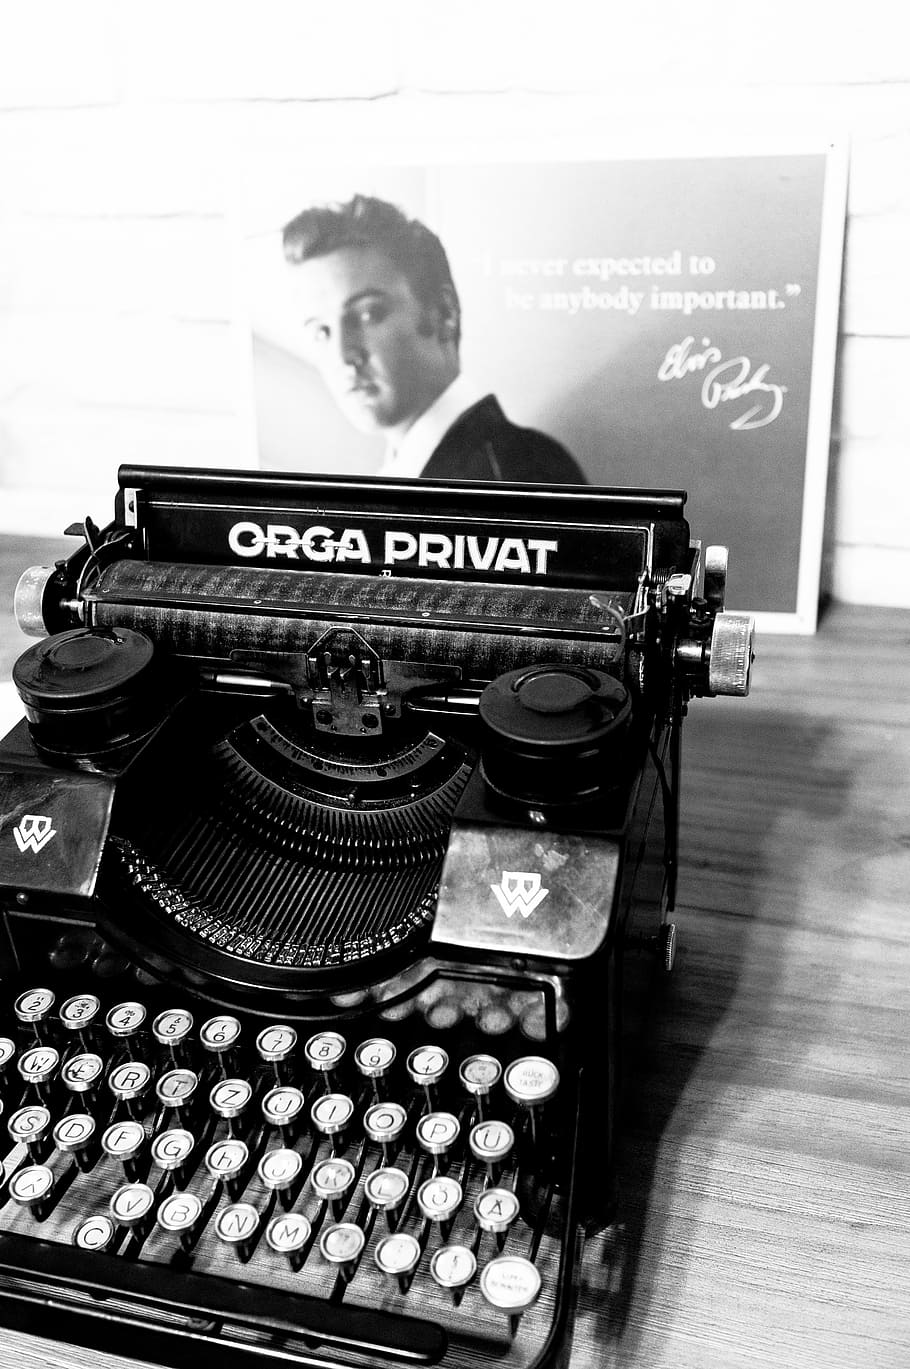 retro, typewriter, orga privat, old, bw, one man only, old-fashioned, one person, retro styled, indoors